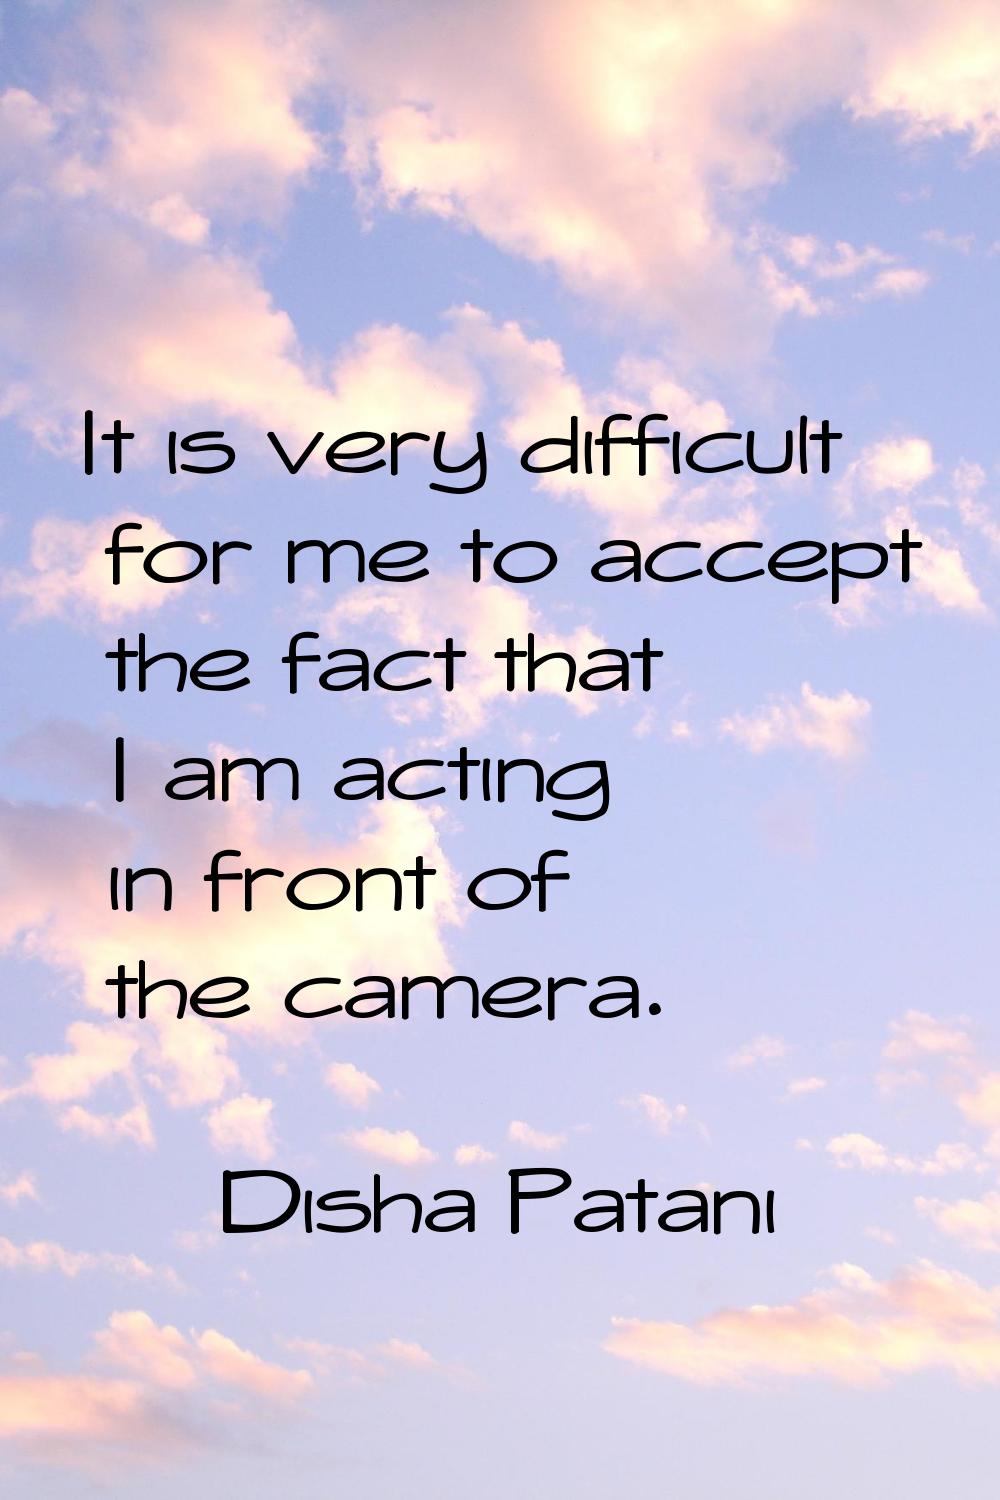 It is very difficult for me to accept the fact that I am acting in front of the camera.